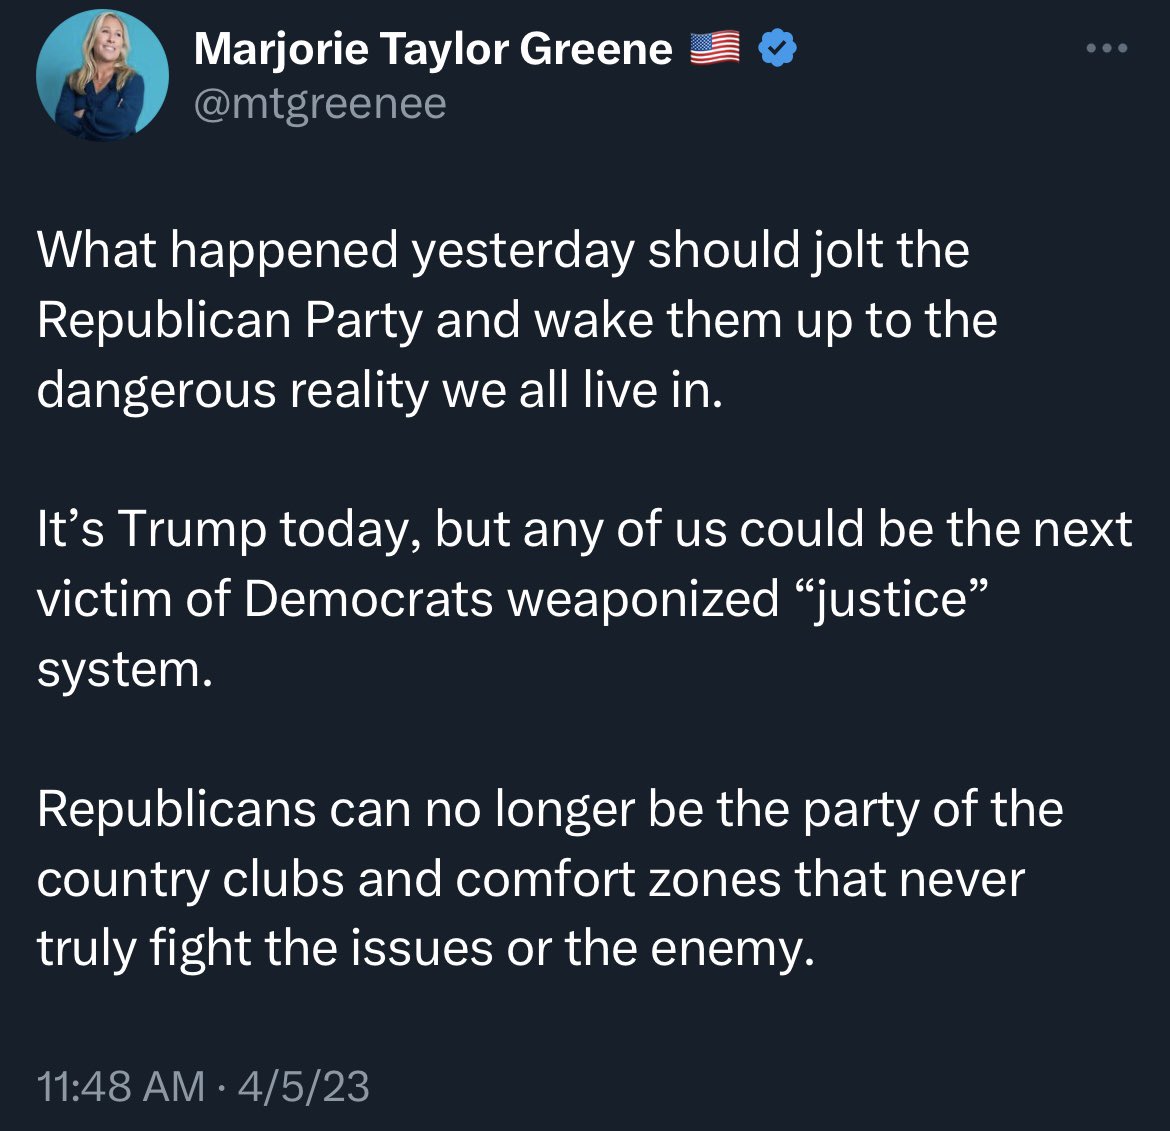 Maybe the rest of the party doesn’t want to go into 2024 with Marge Greene’s 29% national approval rating. We will see.